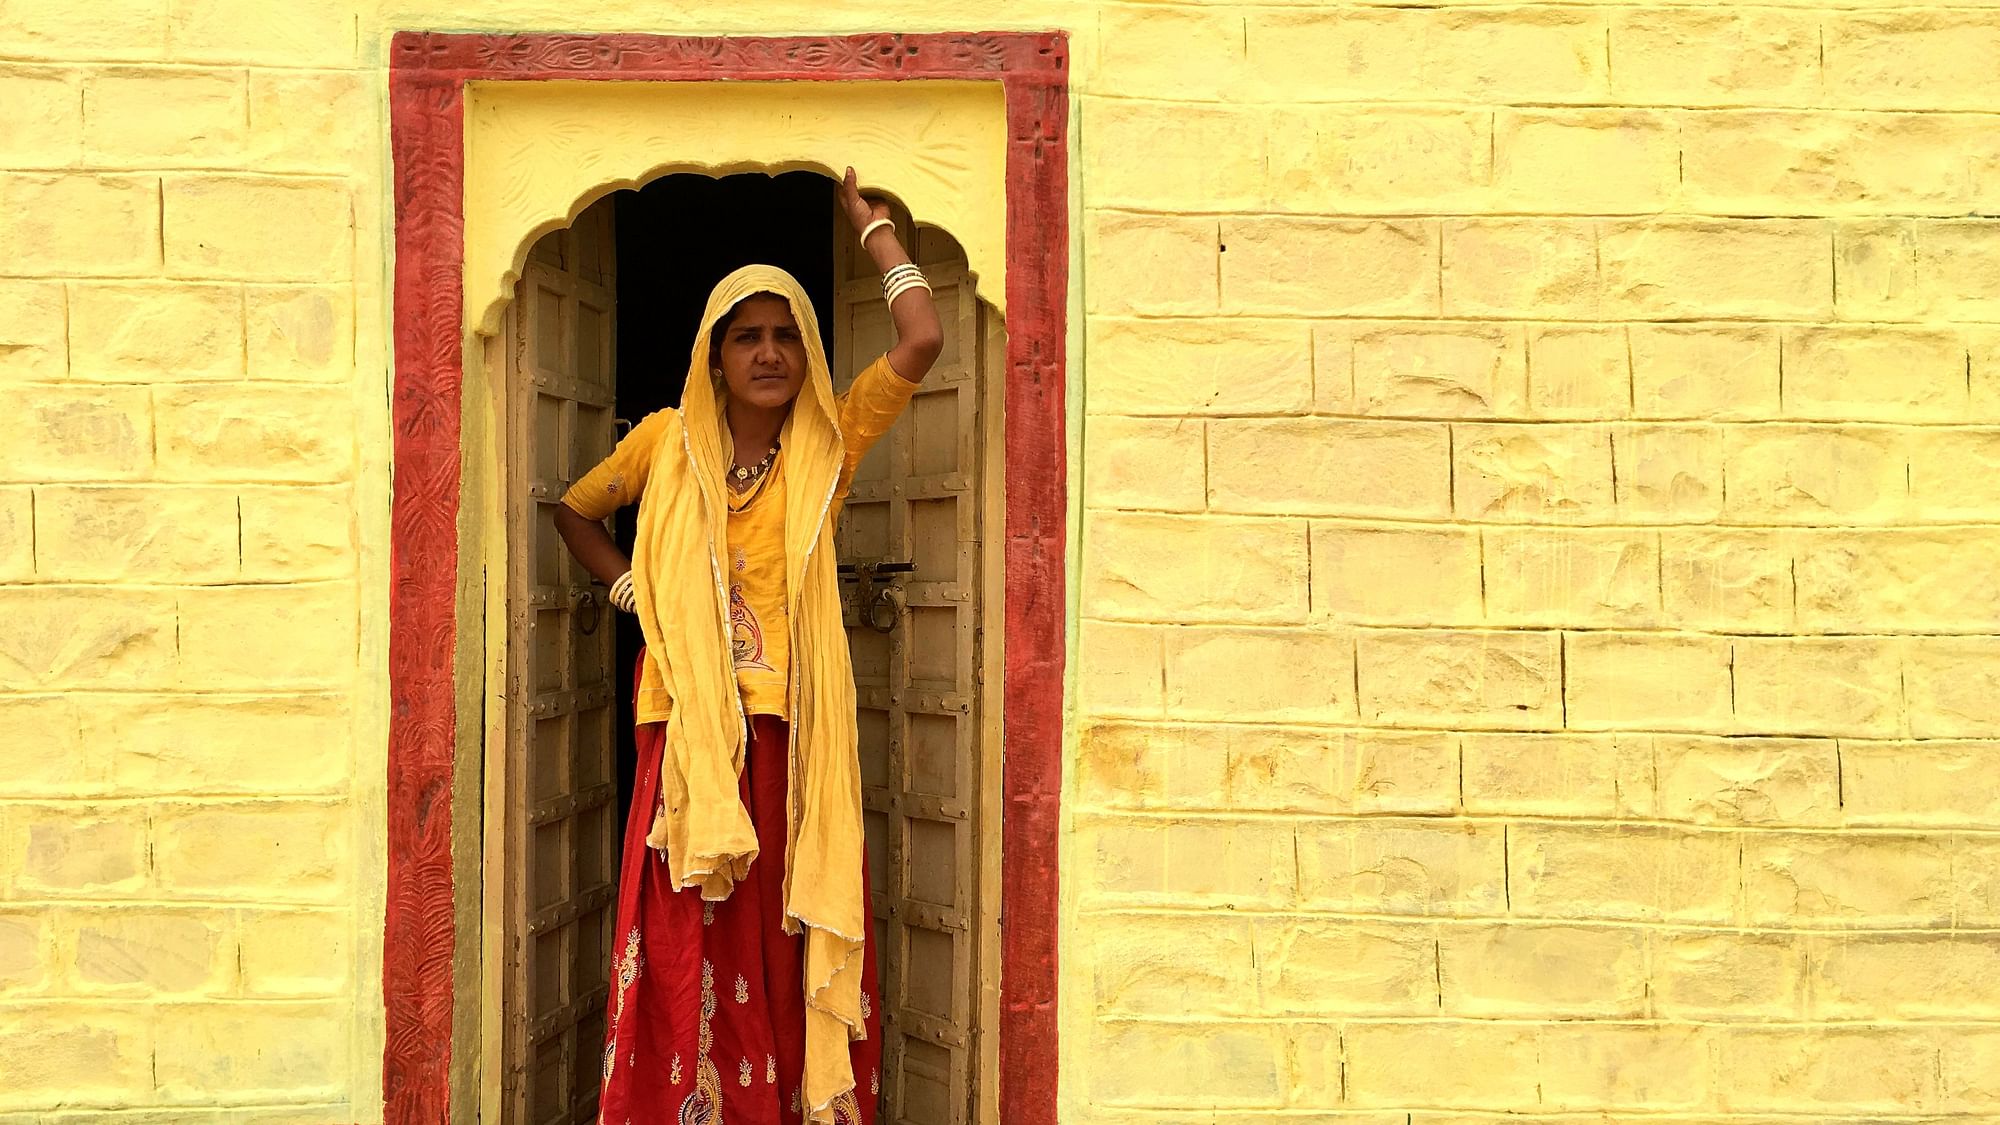 Why are daughters in this village of Rajasthan not getting educated?